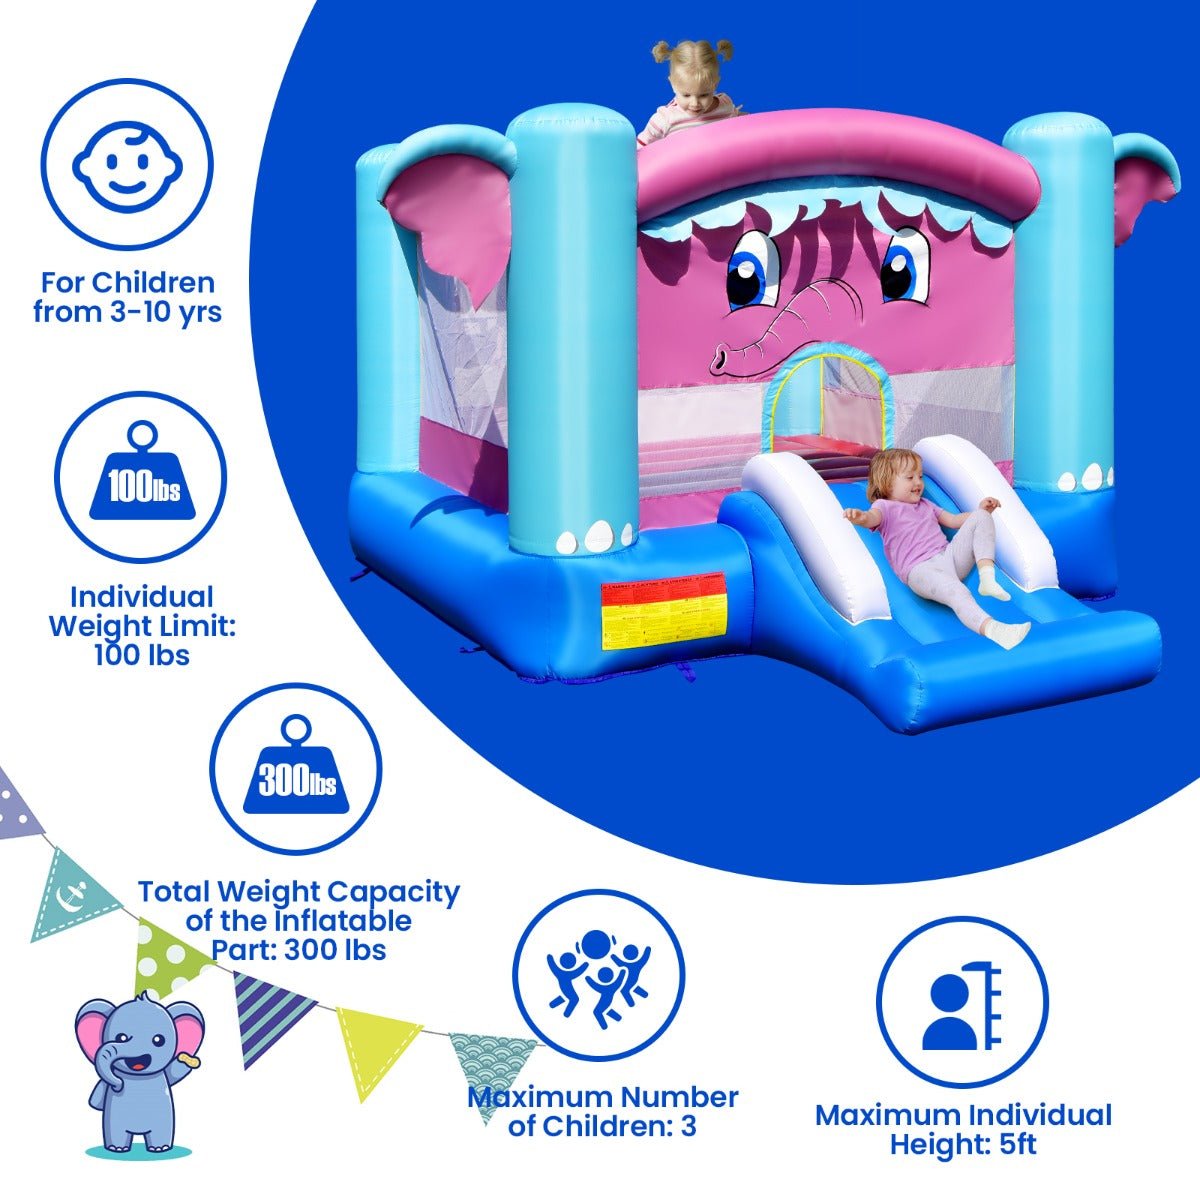 3-in-1 Inflatable Castle with Elephant Theme - Energetic Play for Kids